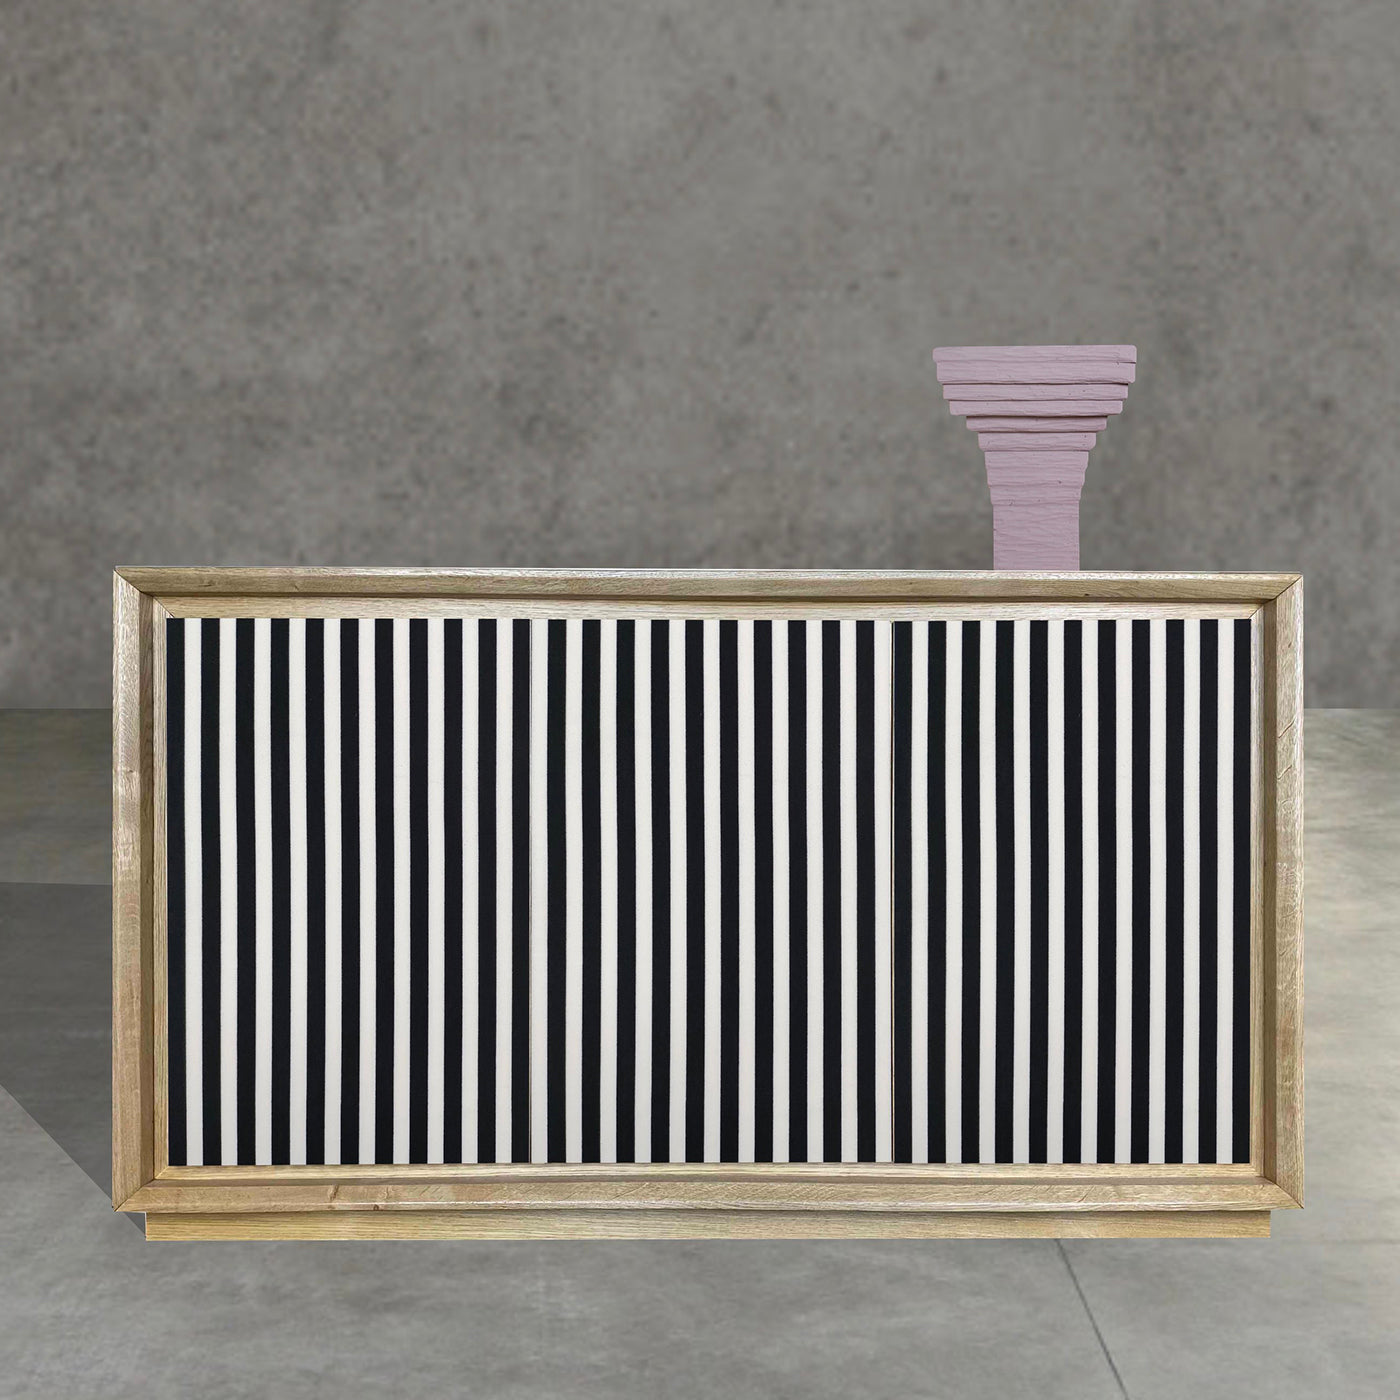 Fuga Strisce Due 3-Door Black-And-White Sideboard by M. Meccani - Alternative view 1